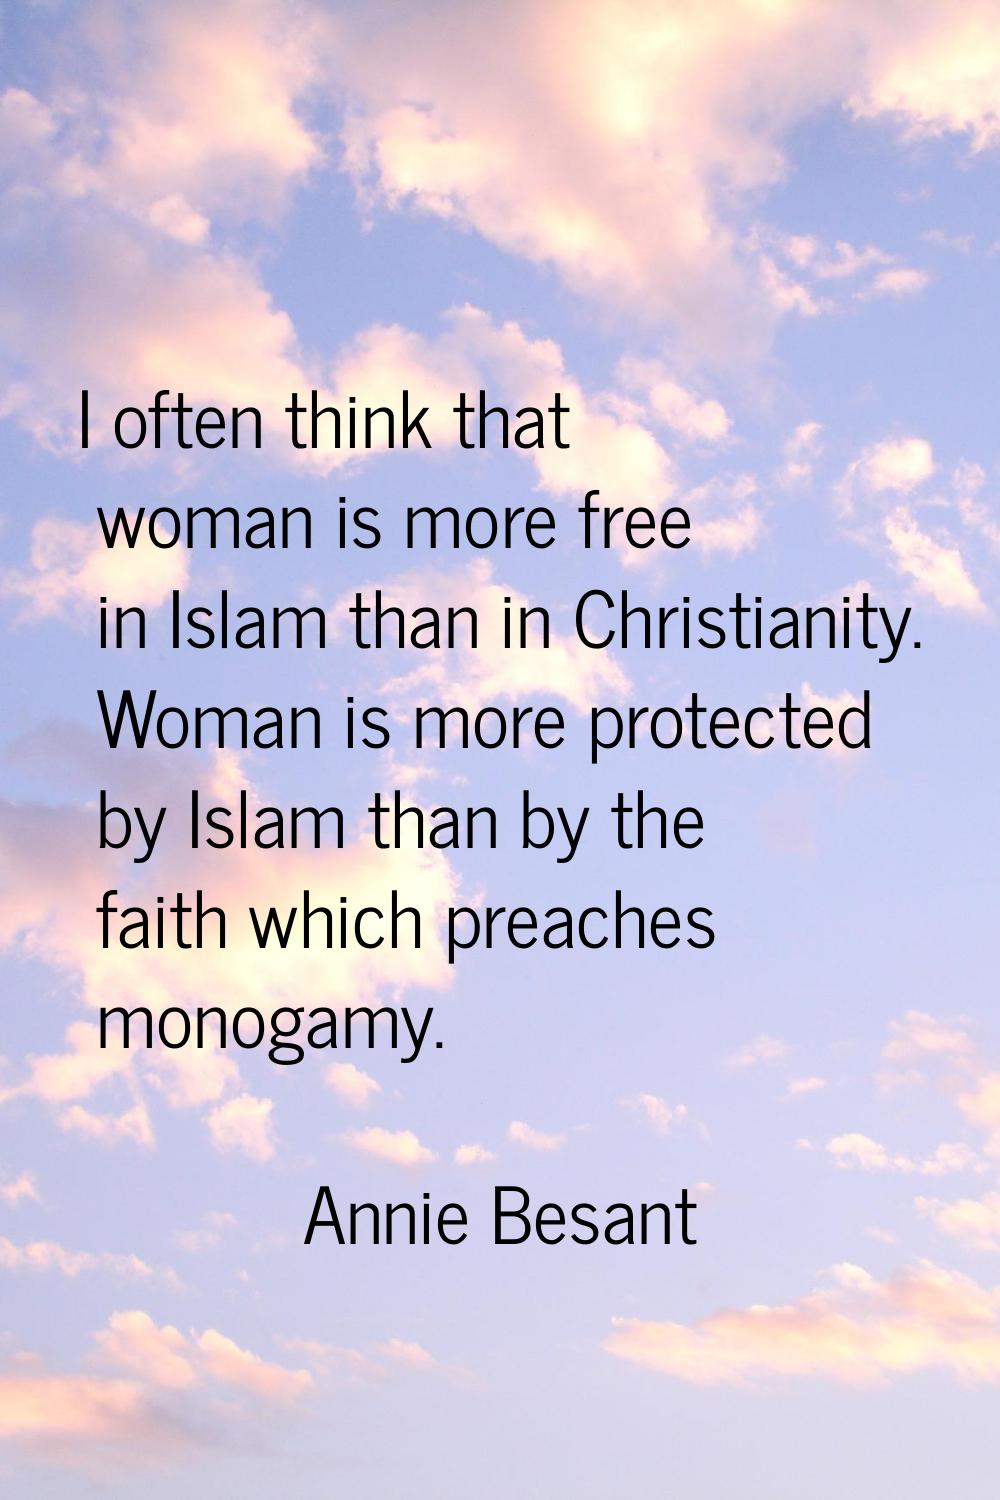 I often think that woman is more free in Islam than in Christianity. Woman is more protected by Isl